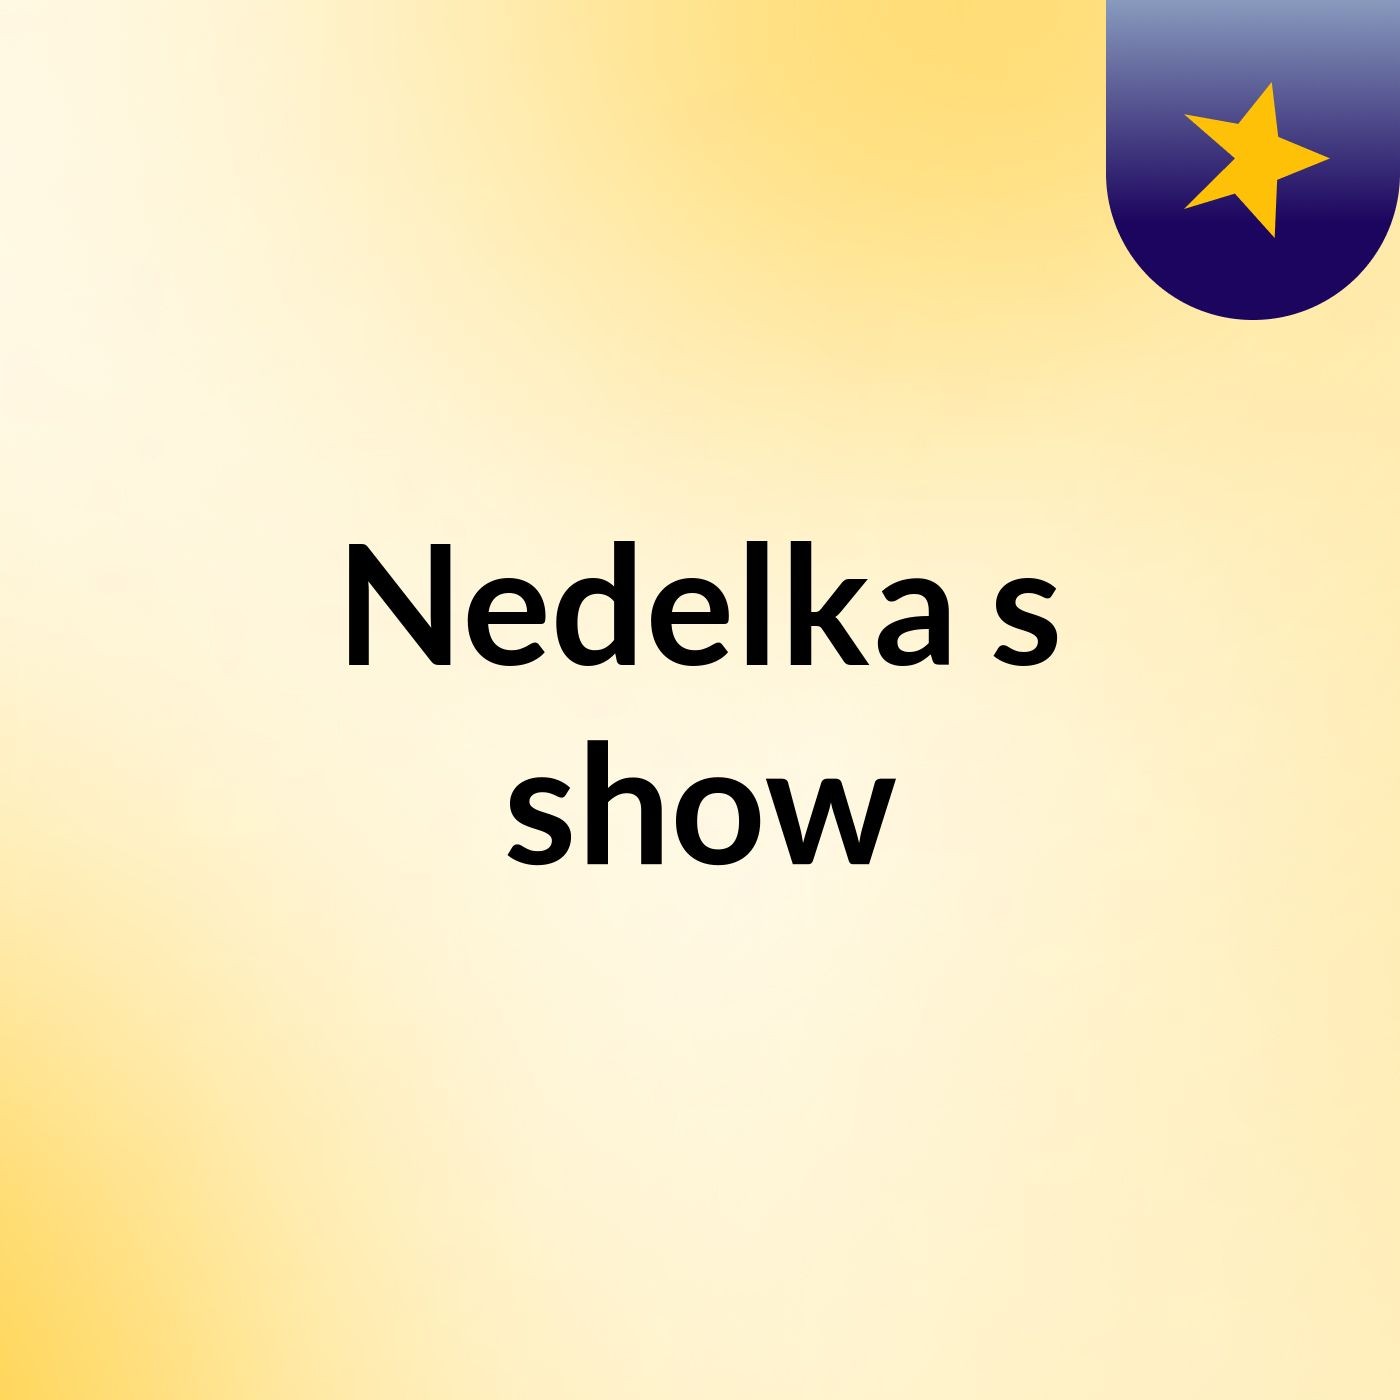 Nedelka's show